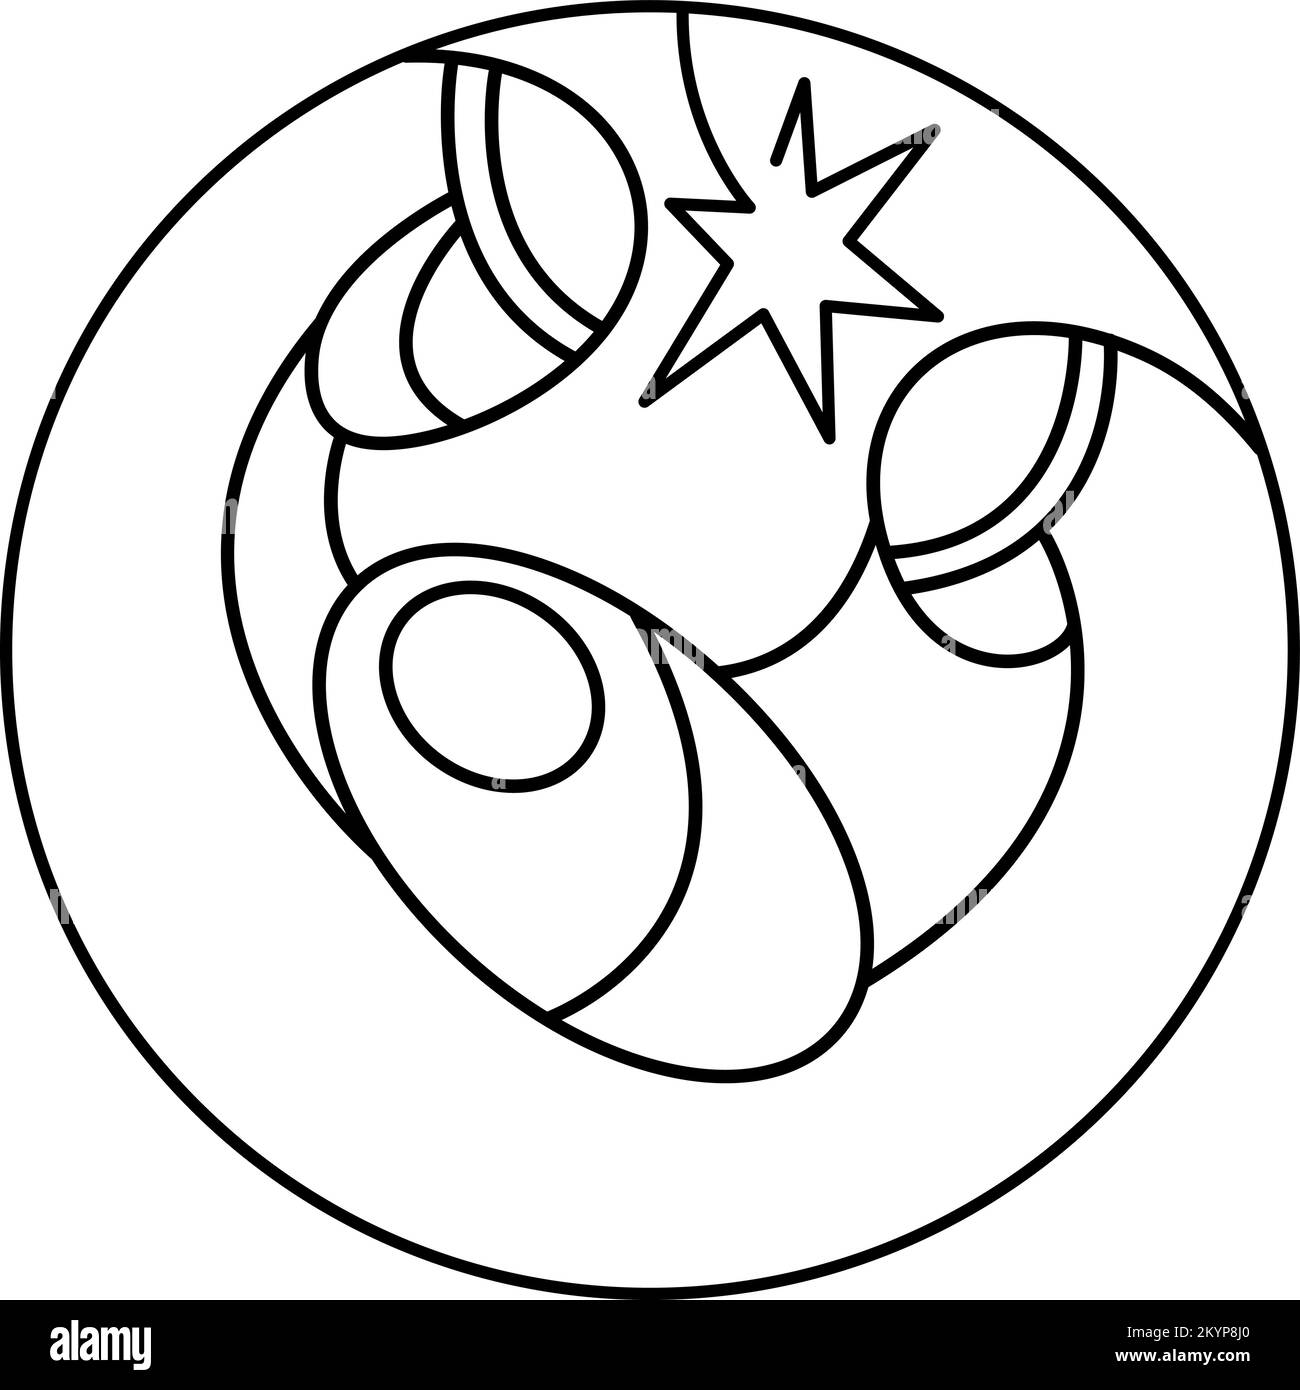 Vector Christmas Christian religious Nativity Scene of baby Jesus with Mary and Joseph in circle. Logo icon illustration sketch. Doodle hand drawn Stock Vector